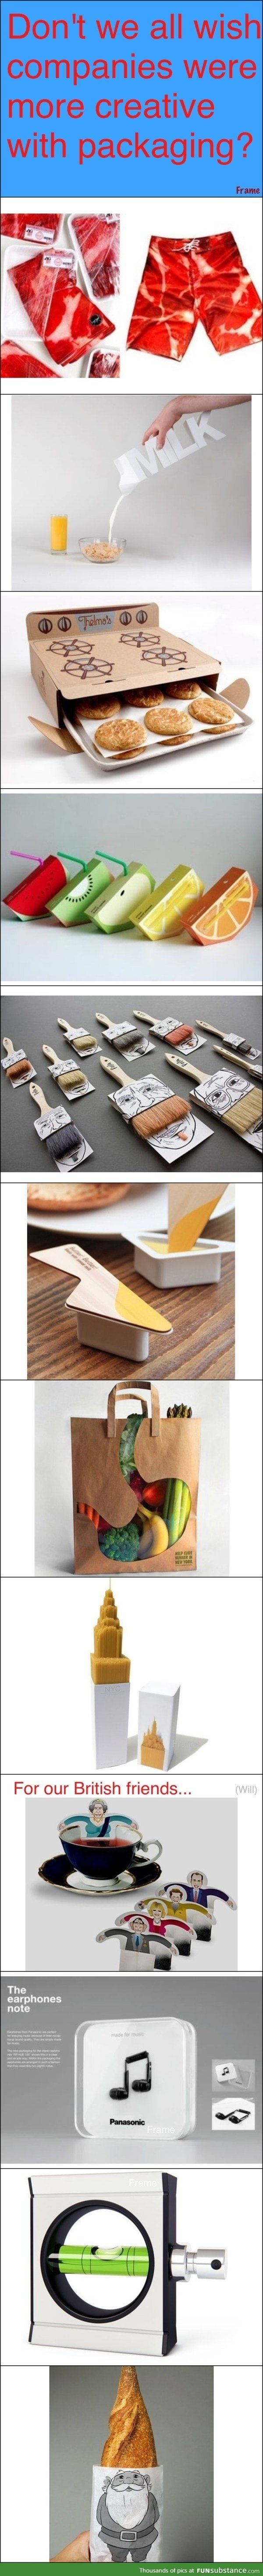 If companies were creative with packaging